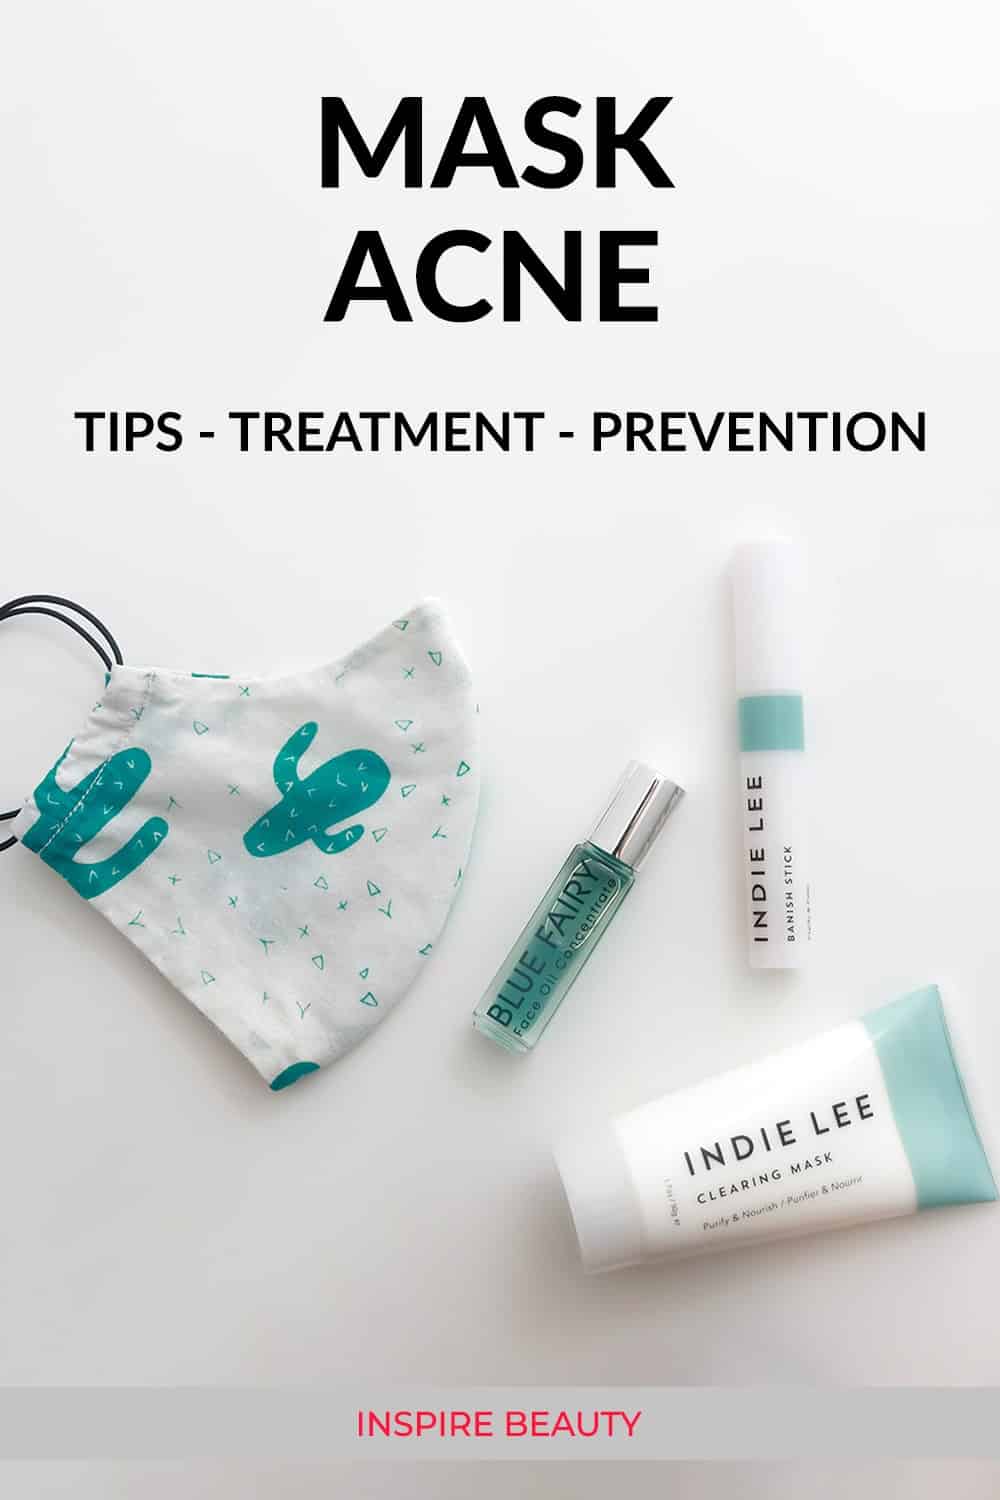 Tips for preventing mask acne, sensitivity and breakouts from wearing a protective face mask